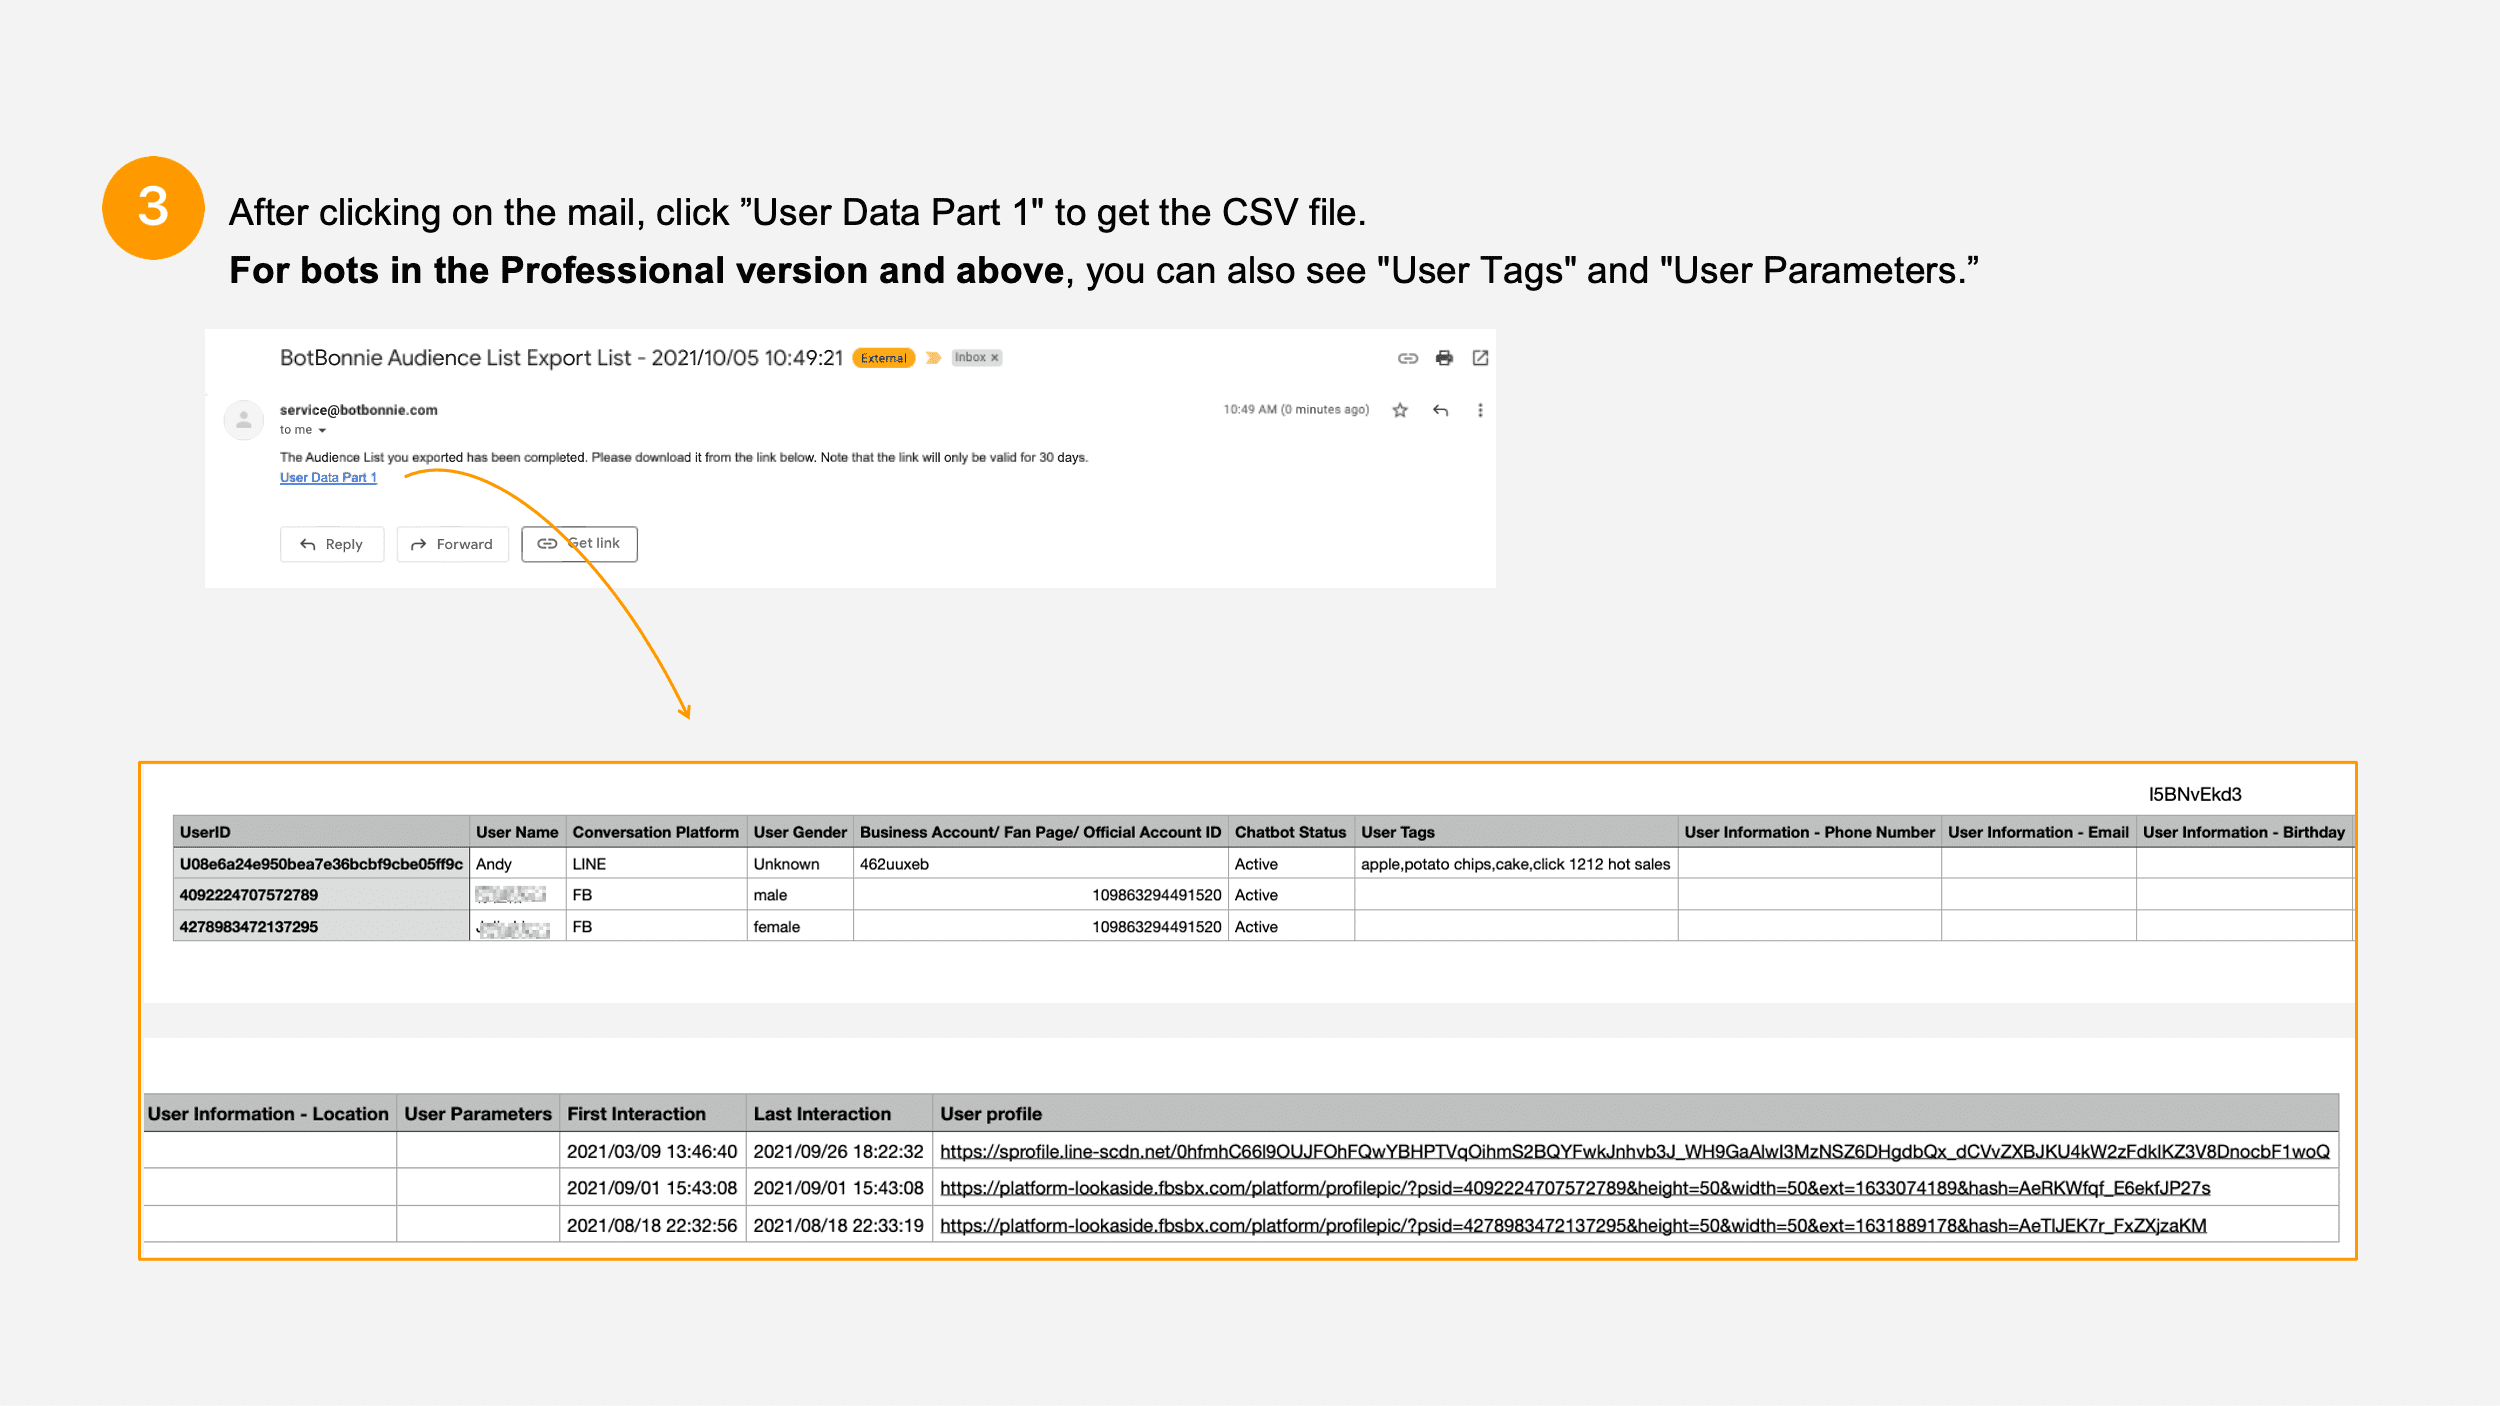 Open the file to see detailed user data